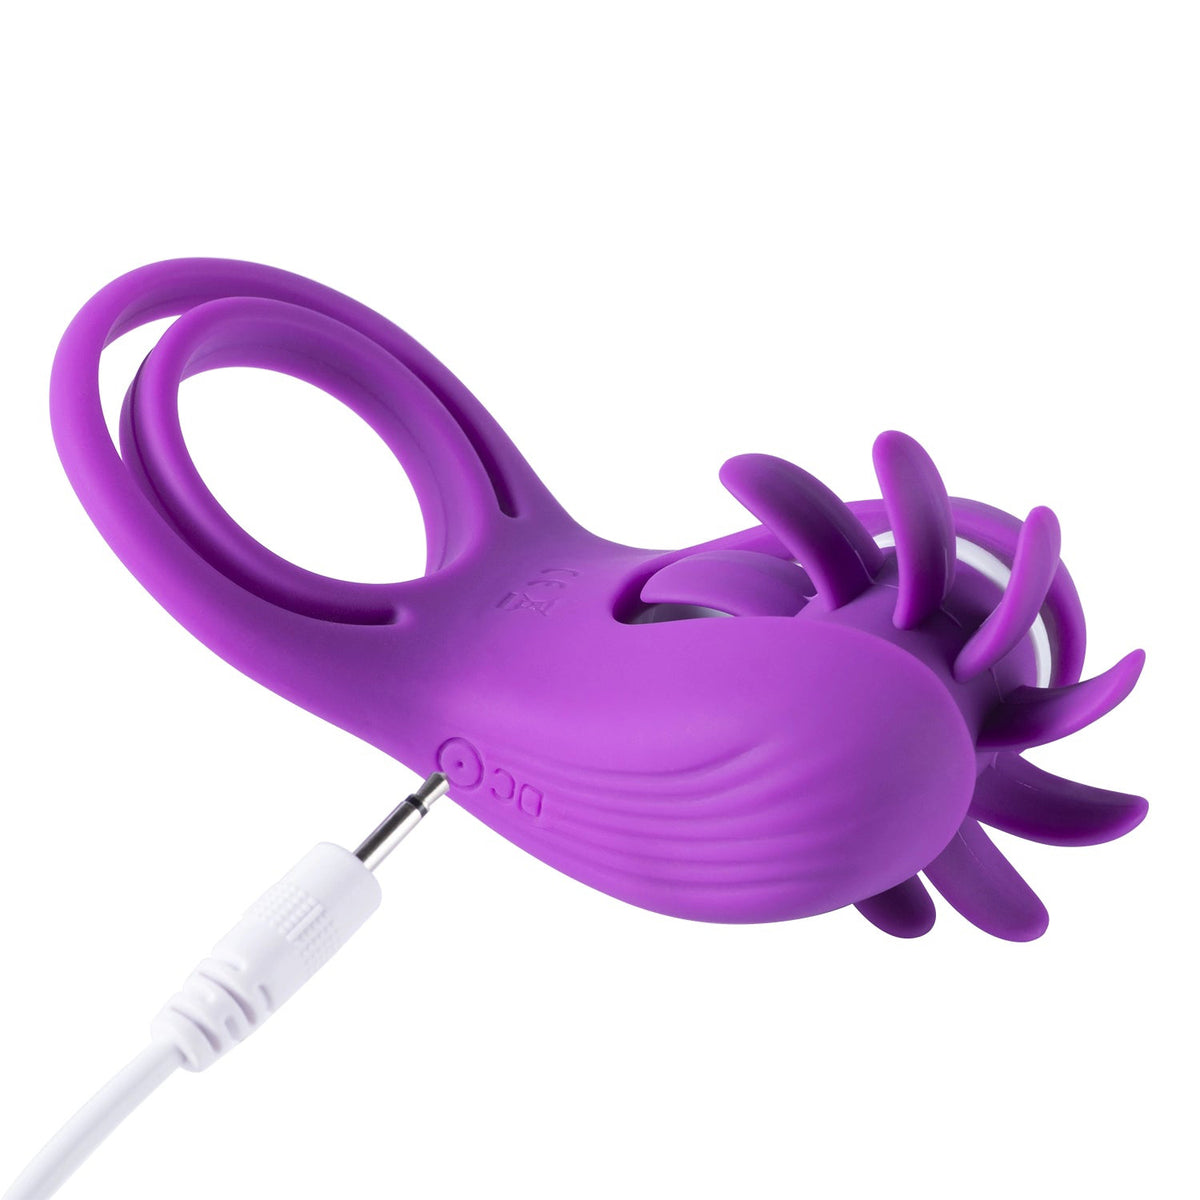 Roxy - Tongue Clit Licker and Cock Ring - Purple